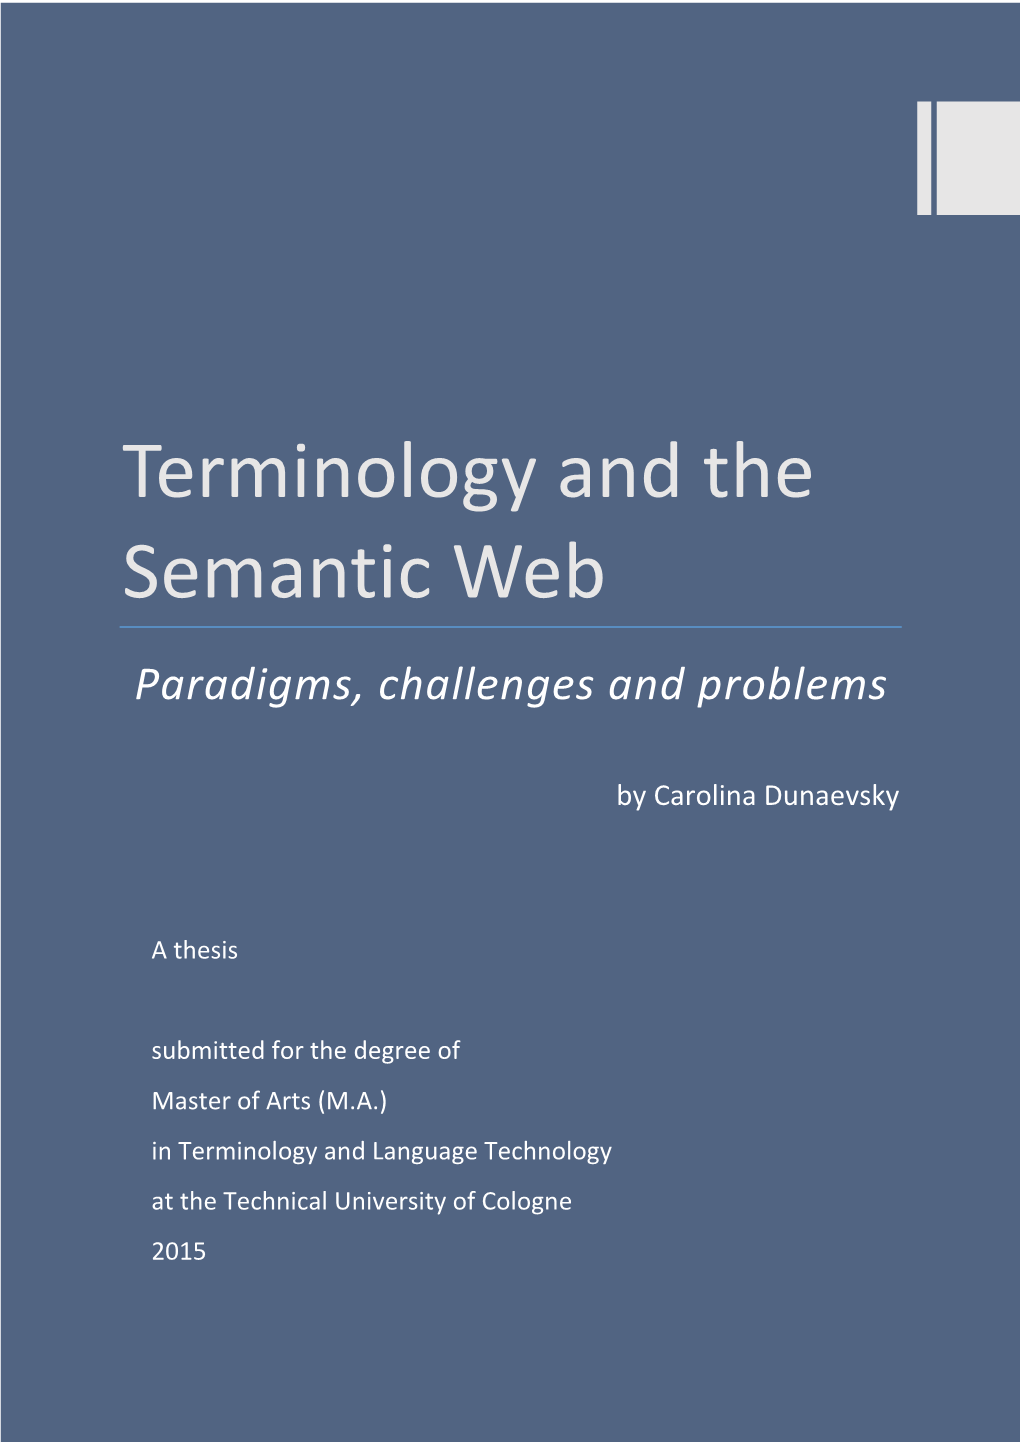 Terminology and the Semantic Web